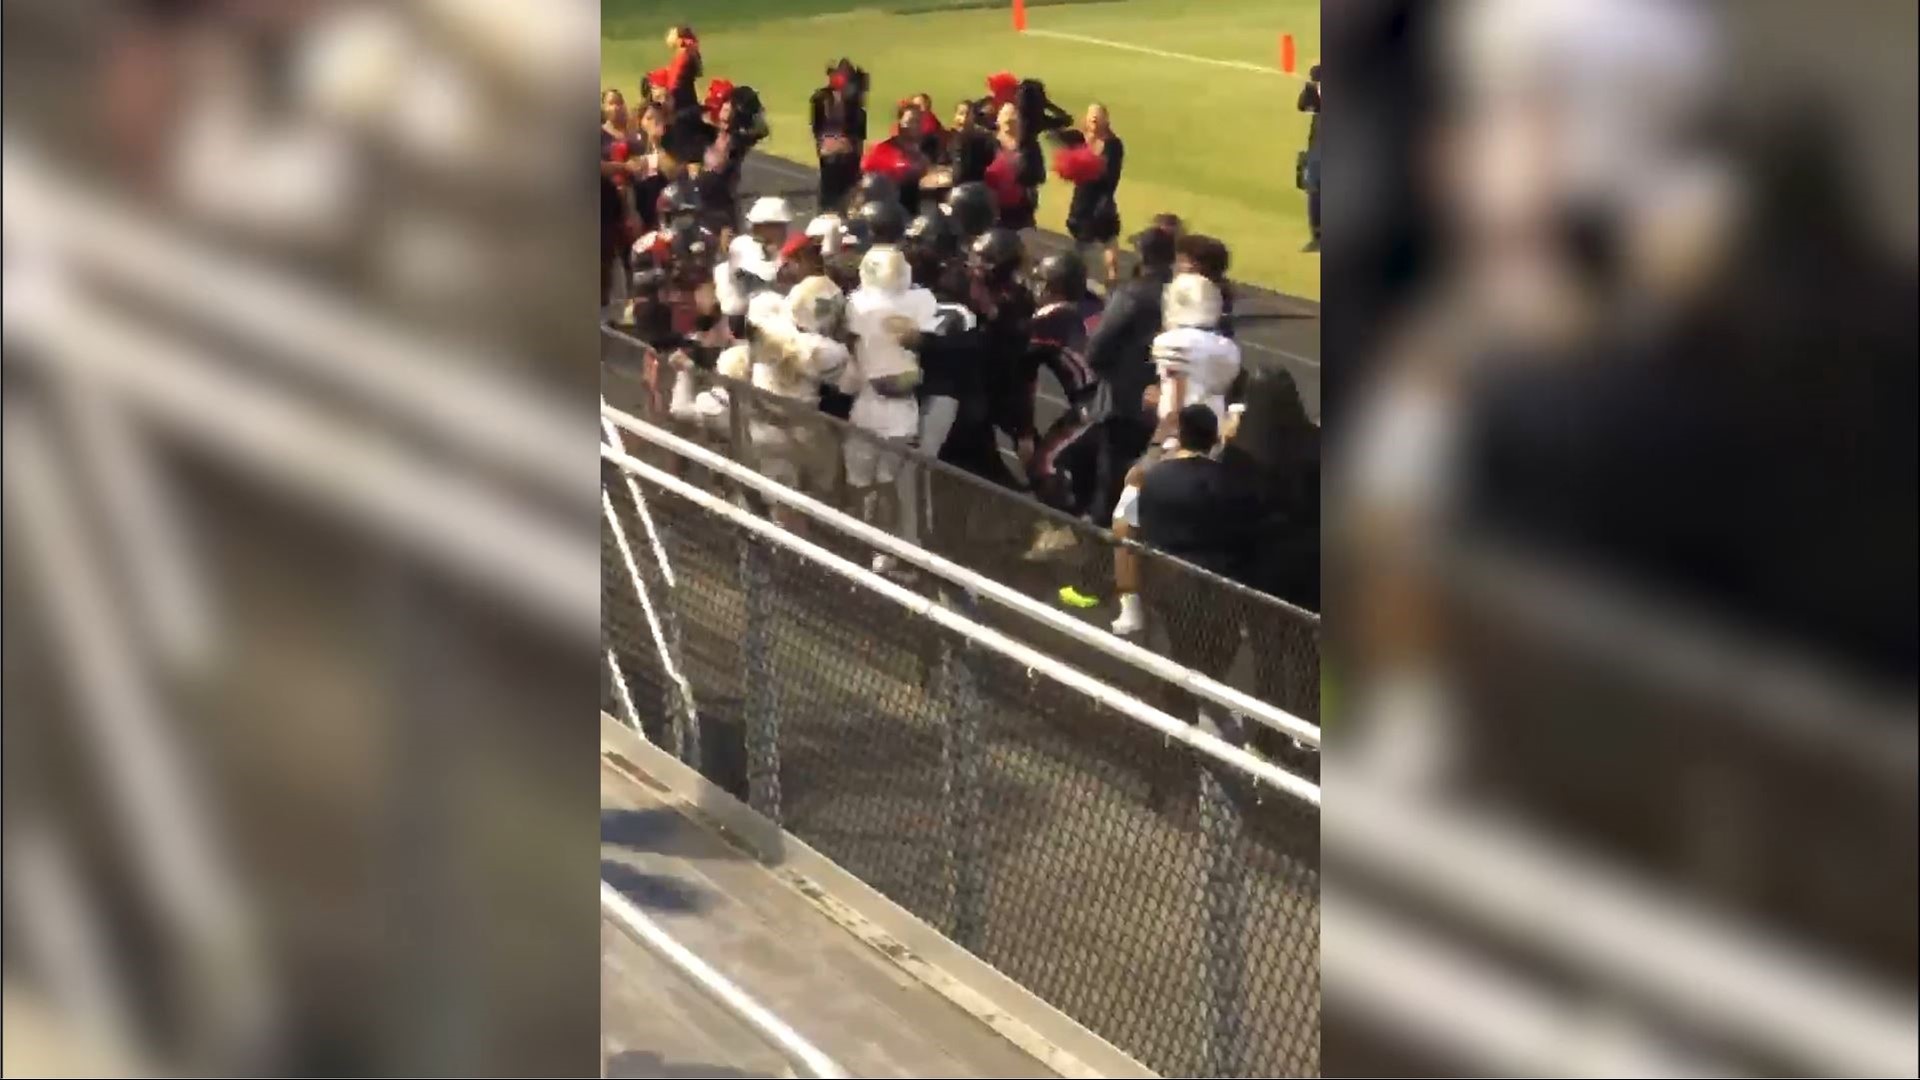 The fight was between players from John F. Kennedy High School and Northwood High School.